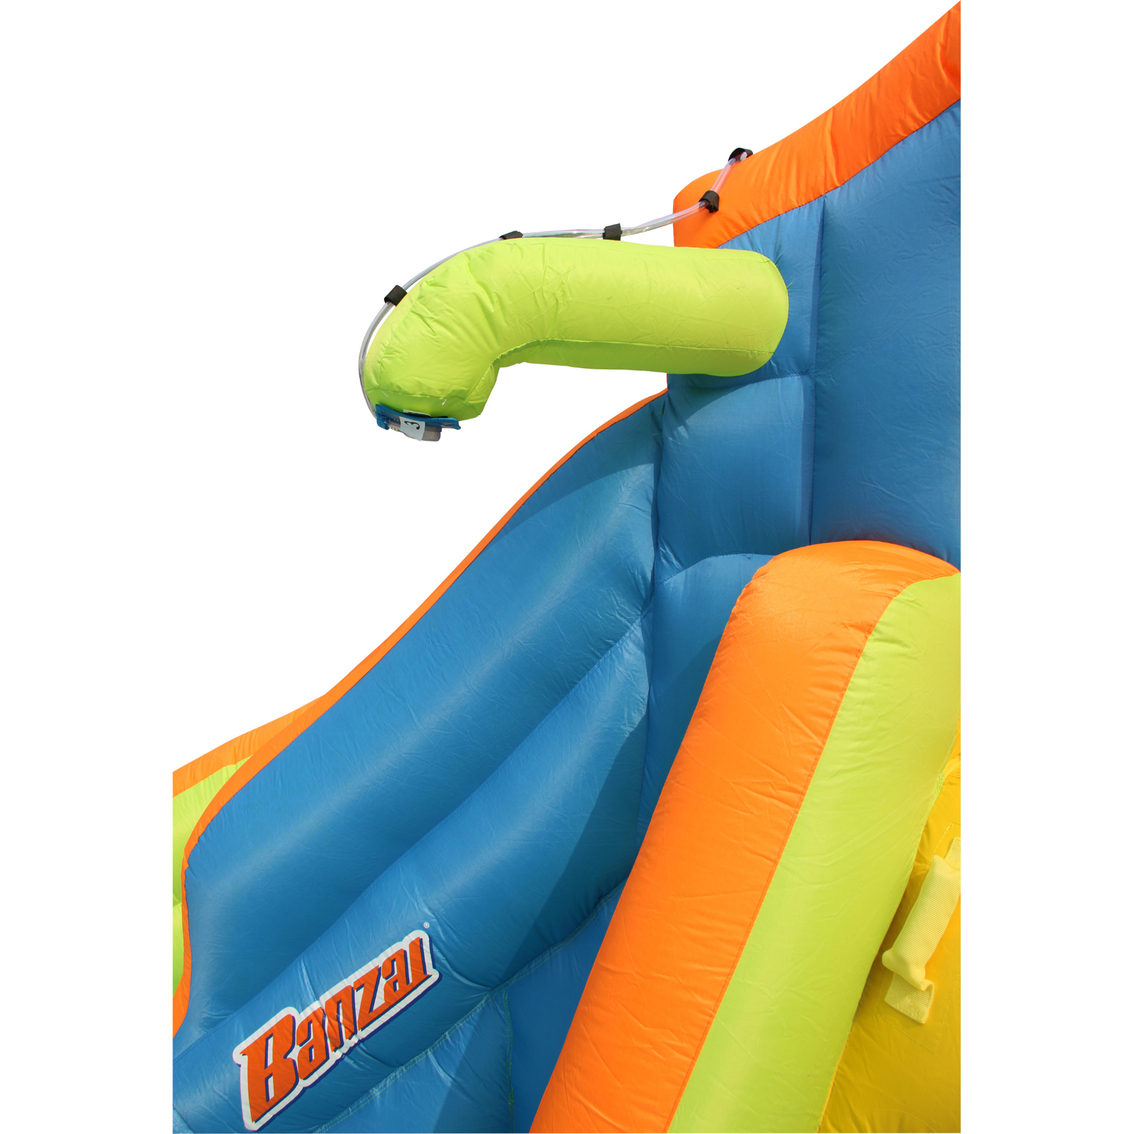 Banzai Inflatable Adventrure Club Water Park - Image 5 of 10